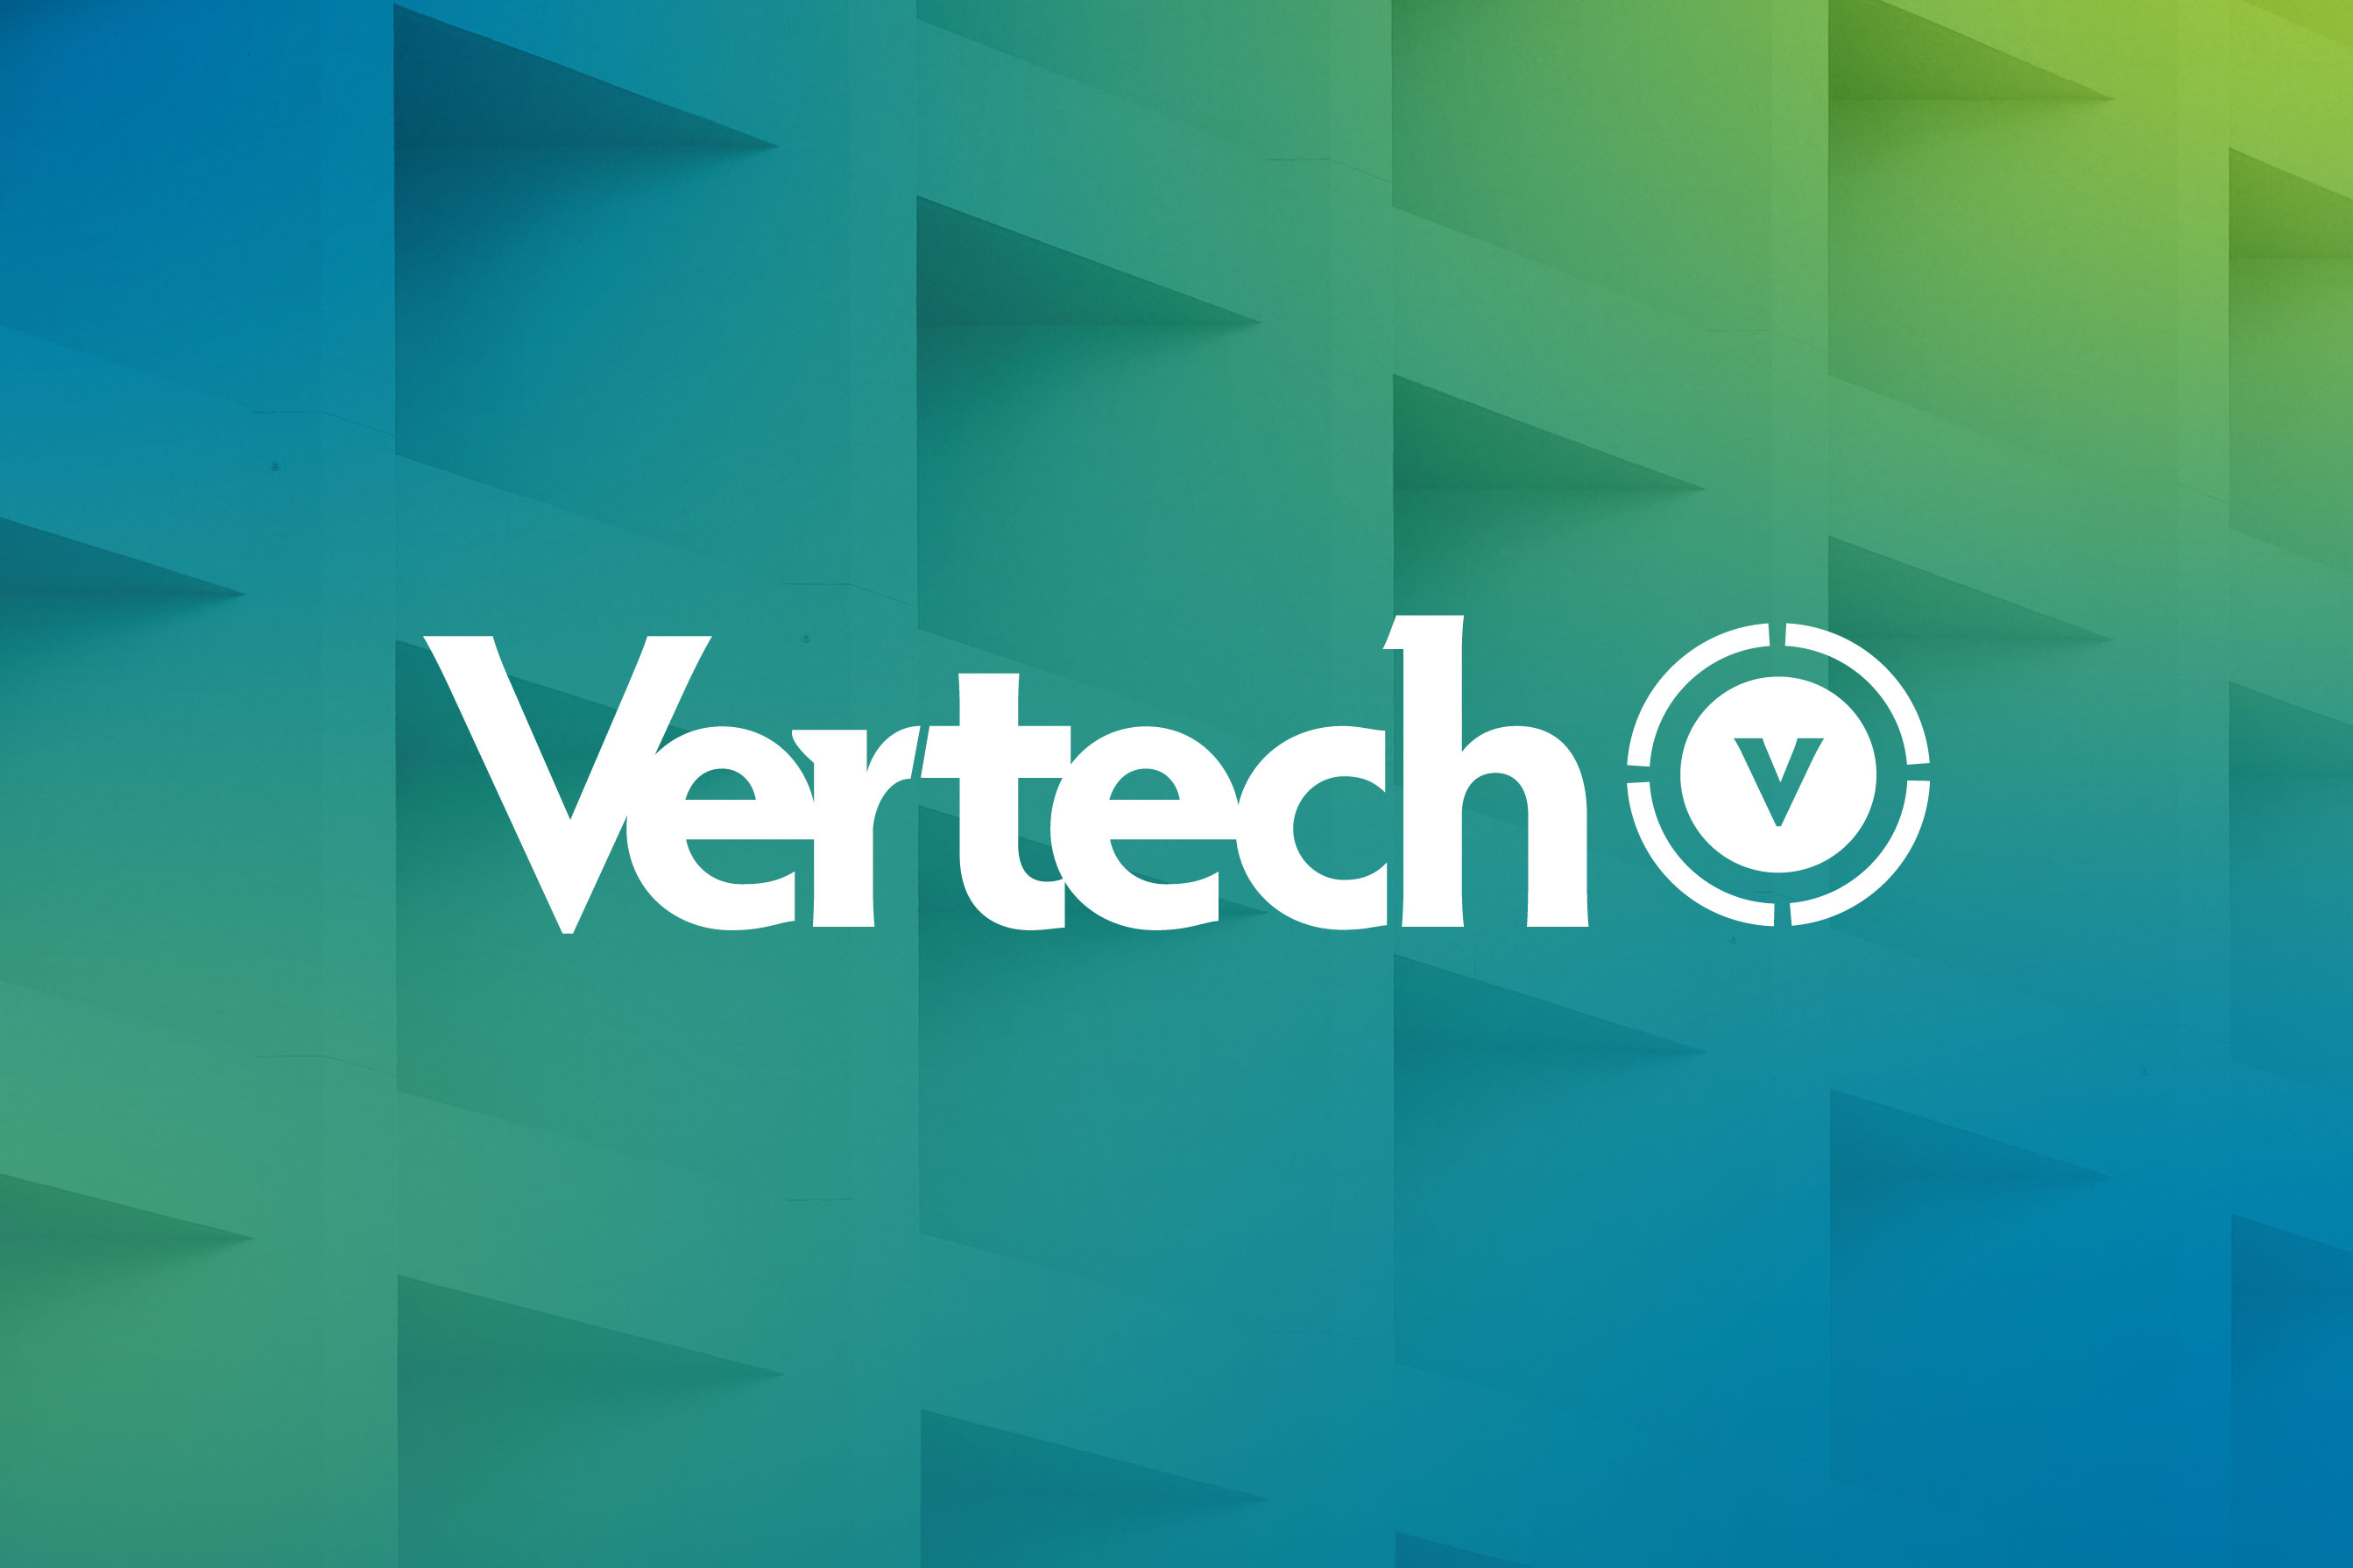 Vertech wins the title of "Integrator of the Year."